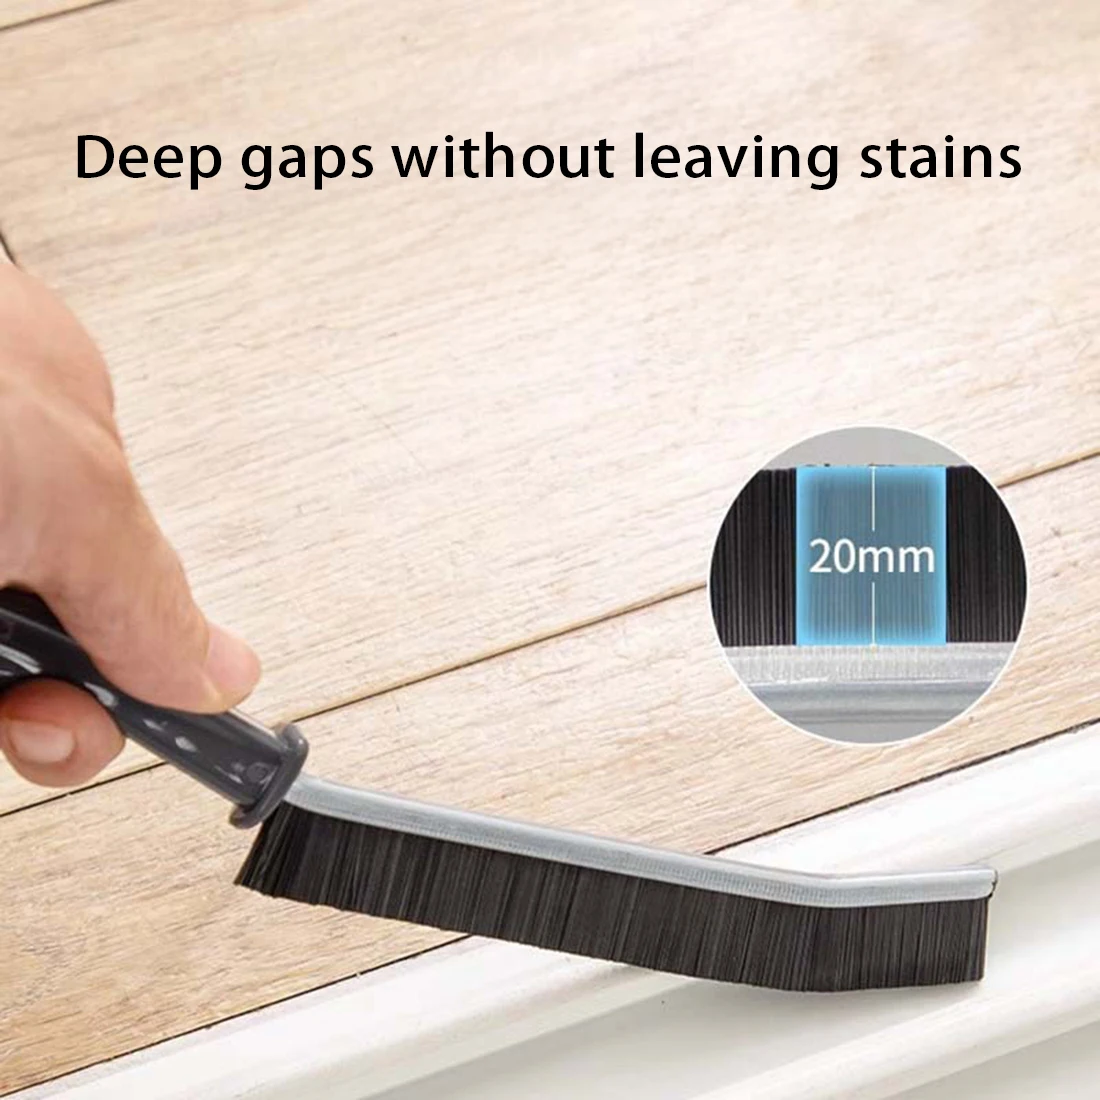 https://ae01.alicdn.com/kf/S55f0929cf63449a98114d49bf6ae92bd2/Soft-Bristled-Crevice-Cleaning-Brush-Grout-Cleaner-Scrub-Brush-Deep-Tile-Joints-Crevice-Gap-Cleaning-Brush.jpg